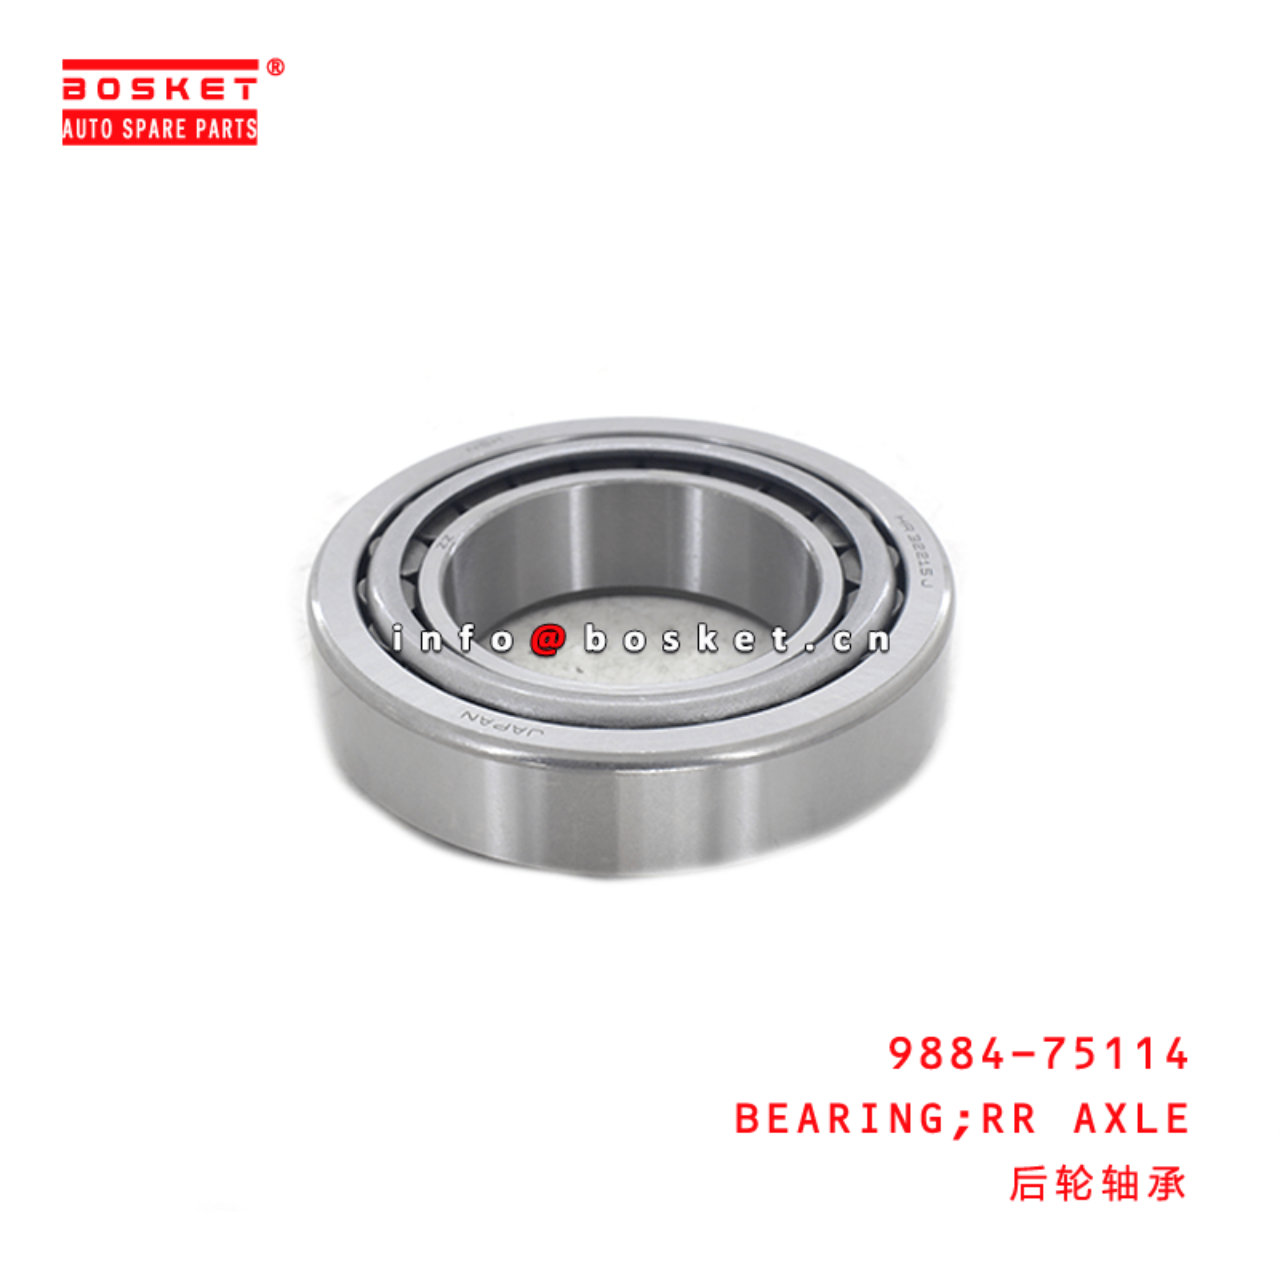  9884-75114 Rear Axle Bearing Suitable For HINO300